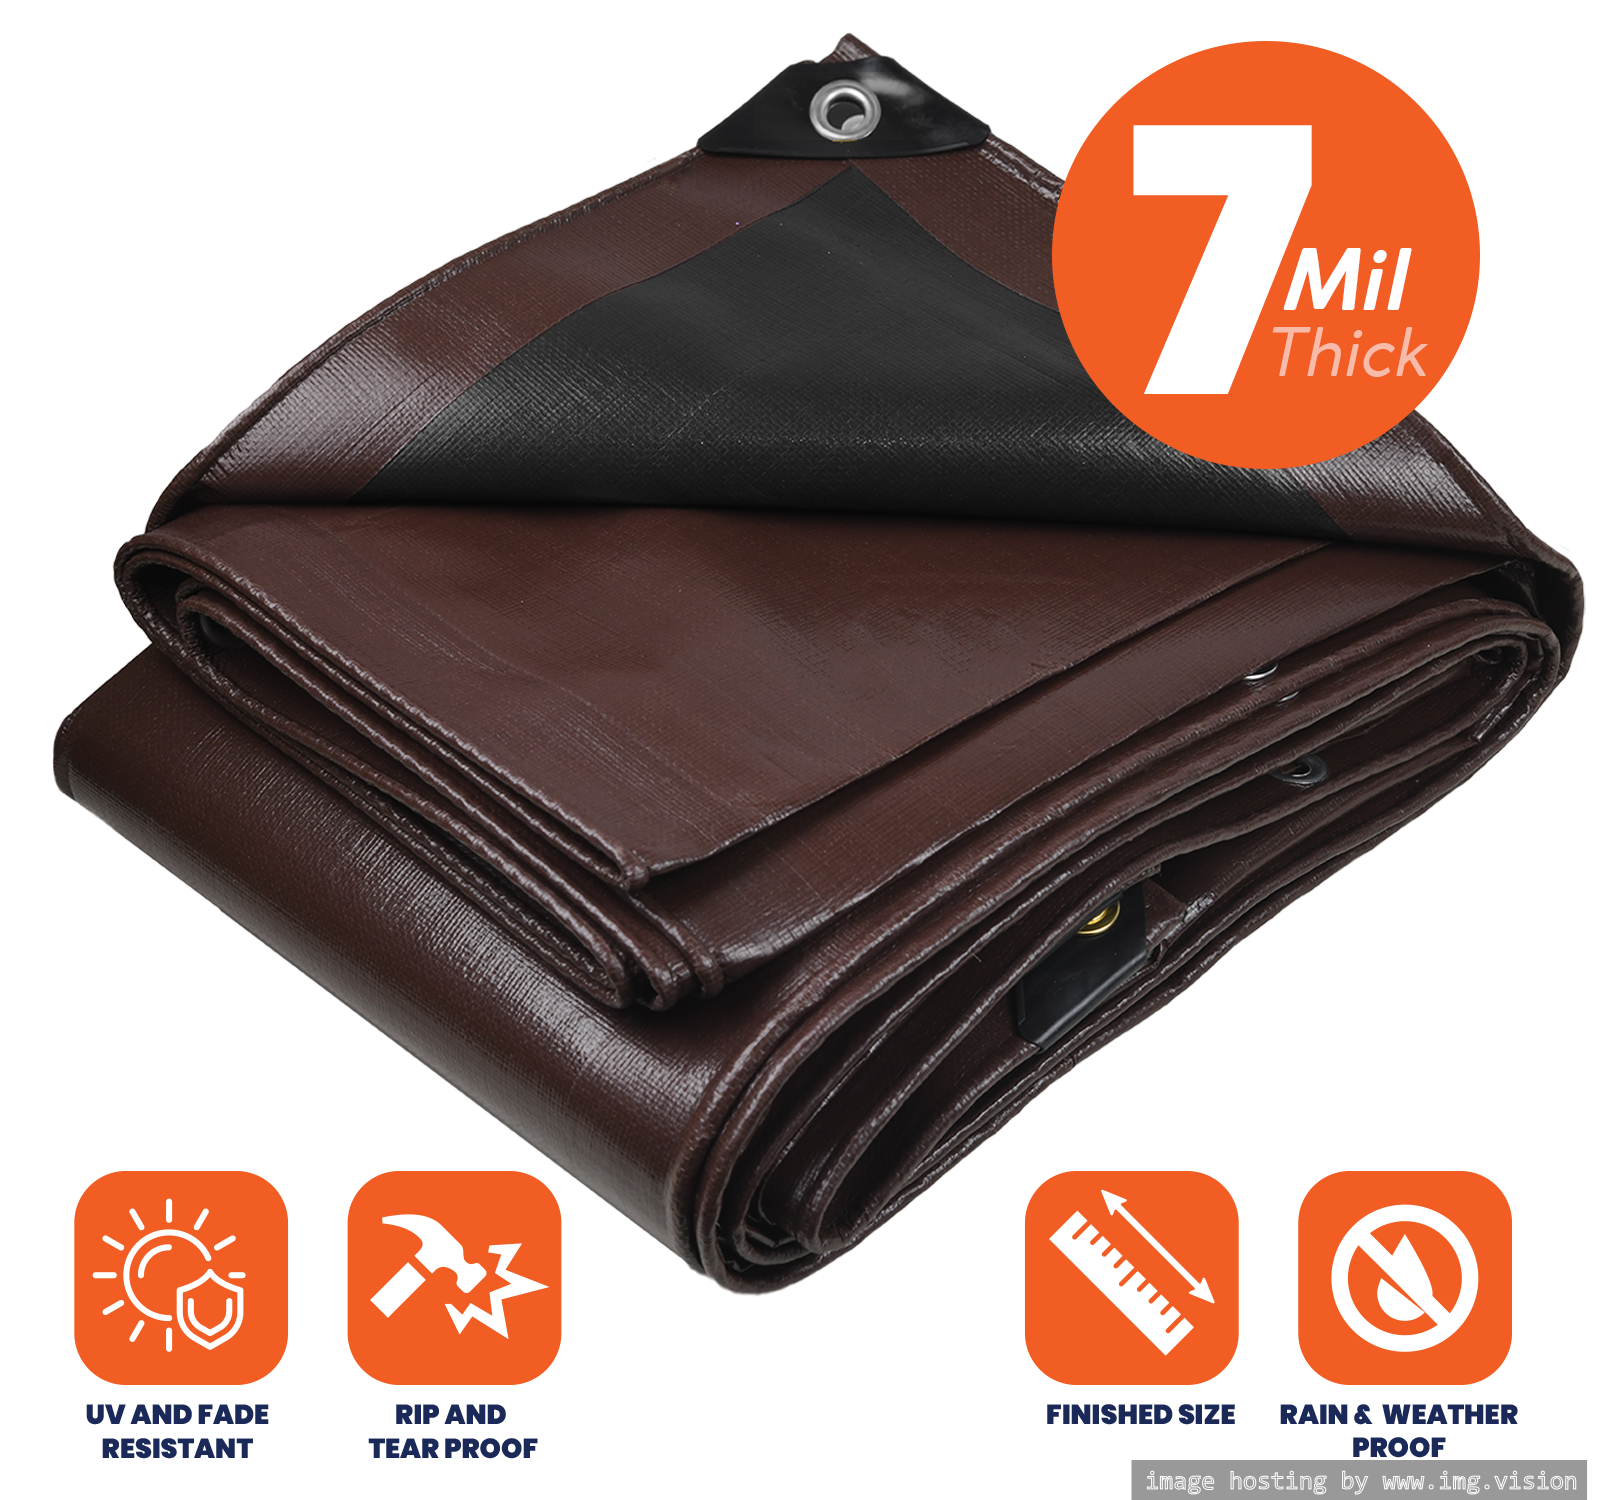 Tarpco Safety Heavy Duty 7 Mil Tarp Cover 16′ X 20′ Brown/Black UV Resistant, Rip and Tear Proof.